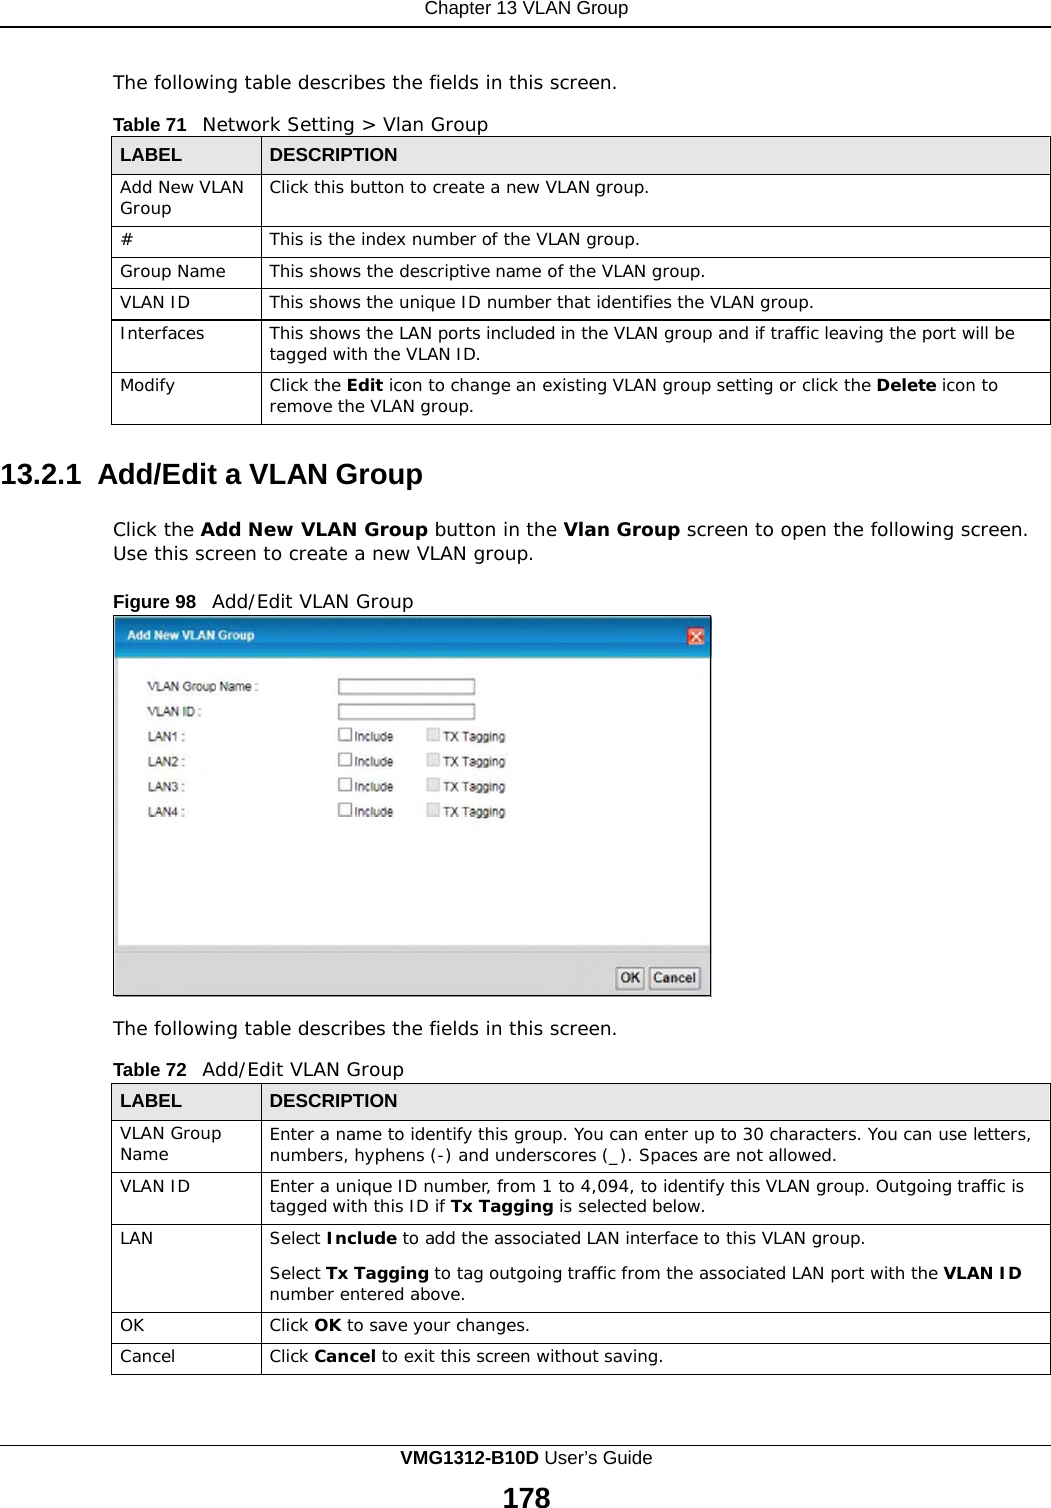    Chapter 13 VLAN Group   The following table describes the fields in this screen.  Table 71   Network Setting &gt; Vlan Group  LABEL DESCRIPTION Add New VLAN Group Click this button to create a new VLAN group. # This is the index number of the VLAN group. Group Name This shows the descriptive name of the VLAN group. VLAN ID This shows the unique ID number that identifies the VLAN group. Interfaces This shows the LAN ports included in the VLAN group and if traffic leaving the port will be tagged with the VLAN ID. Modify Click the Edit icon to change an existing VLAN group setting or click the Delete icon to remove the VLAN group.  13.2.1 Add/Edit a VLAN Group  Click the Add New VLAN Group button in the Vlan Group screen to open the following screen. Use this screen to create a new VLAN group.  Figure 98   Add/Edit VLAN Group                    The following table describes the fields in this screen.  Table 72   Add/Edit VLAN Group  LABEL DESCRIPTION VLAN Group Name Enter a name to identify this group. You can enter up to 30 characters. You can use letters, numbers, hyphens (-) and underscores (_). Spaces are not allowed. VLAN ID Enter a unique ID number, from 1 to 4,094, to identify this VLAN group. Outgoing traffic is tagged with this ID if Tx Tagging is selected below. LAN Select Include to add the associated LAN interface to this VLAN group.  Select Tx Tagging to tag outgoing traffic from the associated LAN port with the VLAN ID number entered above. OK Click OK to save your changes. Cancel Click Cancel to exit this screen without saving. VMG1312-B10D User’s Guide  178  